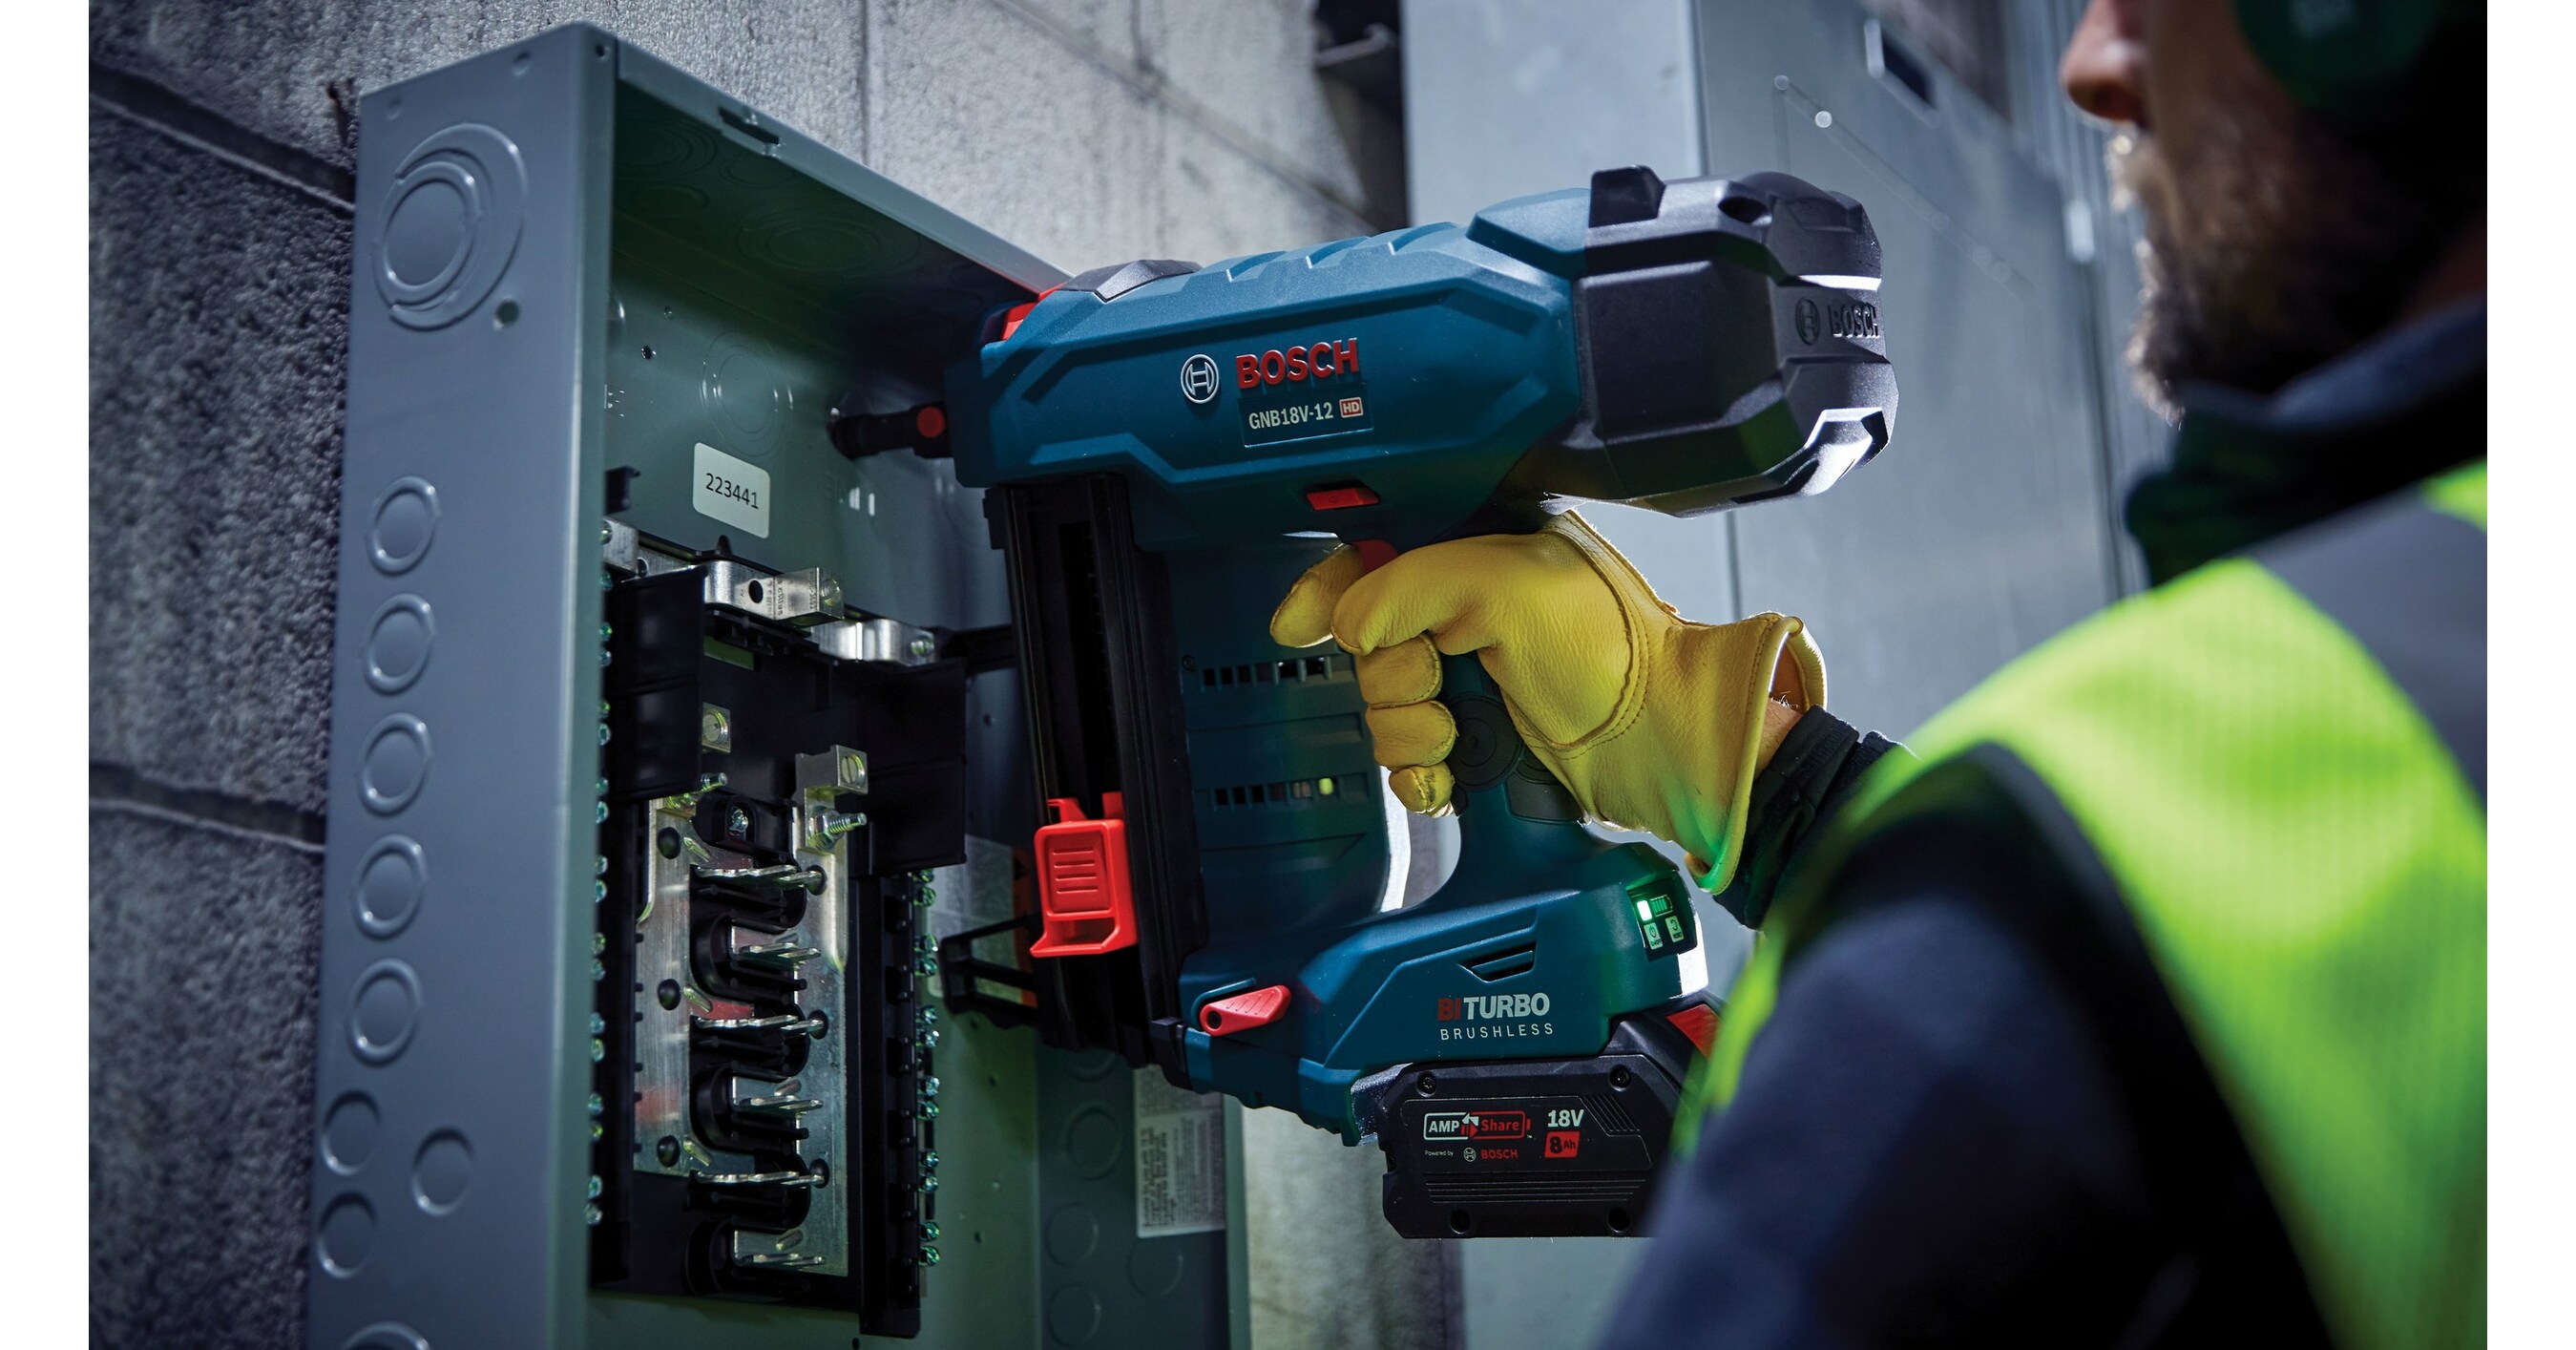 New growth in the Professional 18V System: Professional outdoor equipment  from Bosch - Bosch Media Service